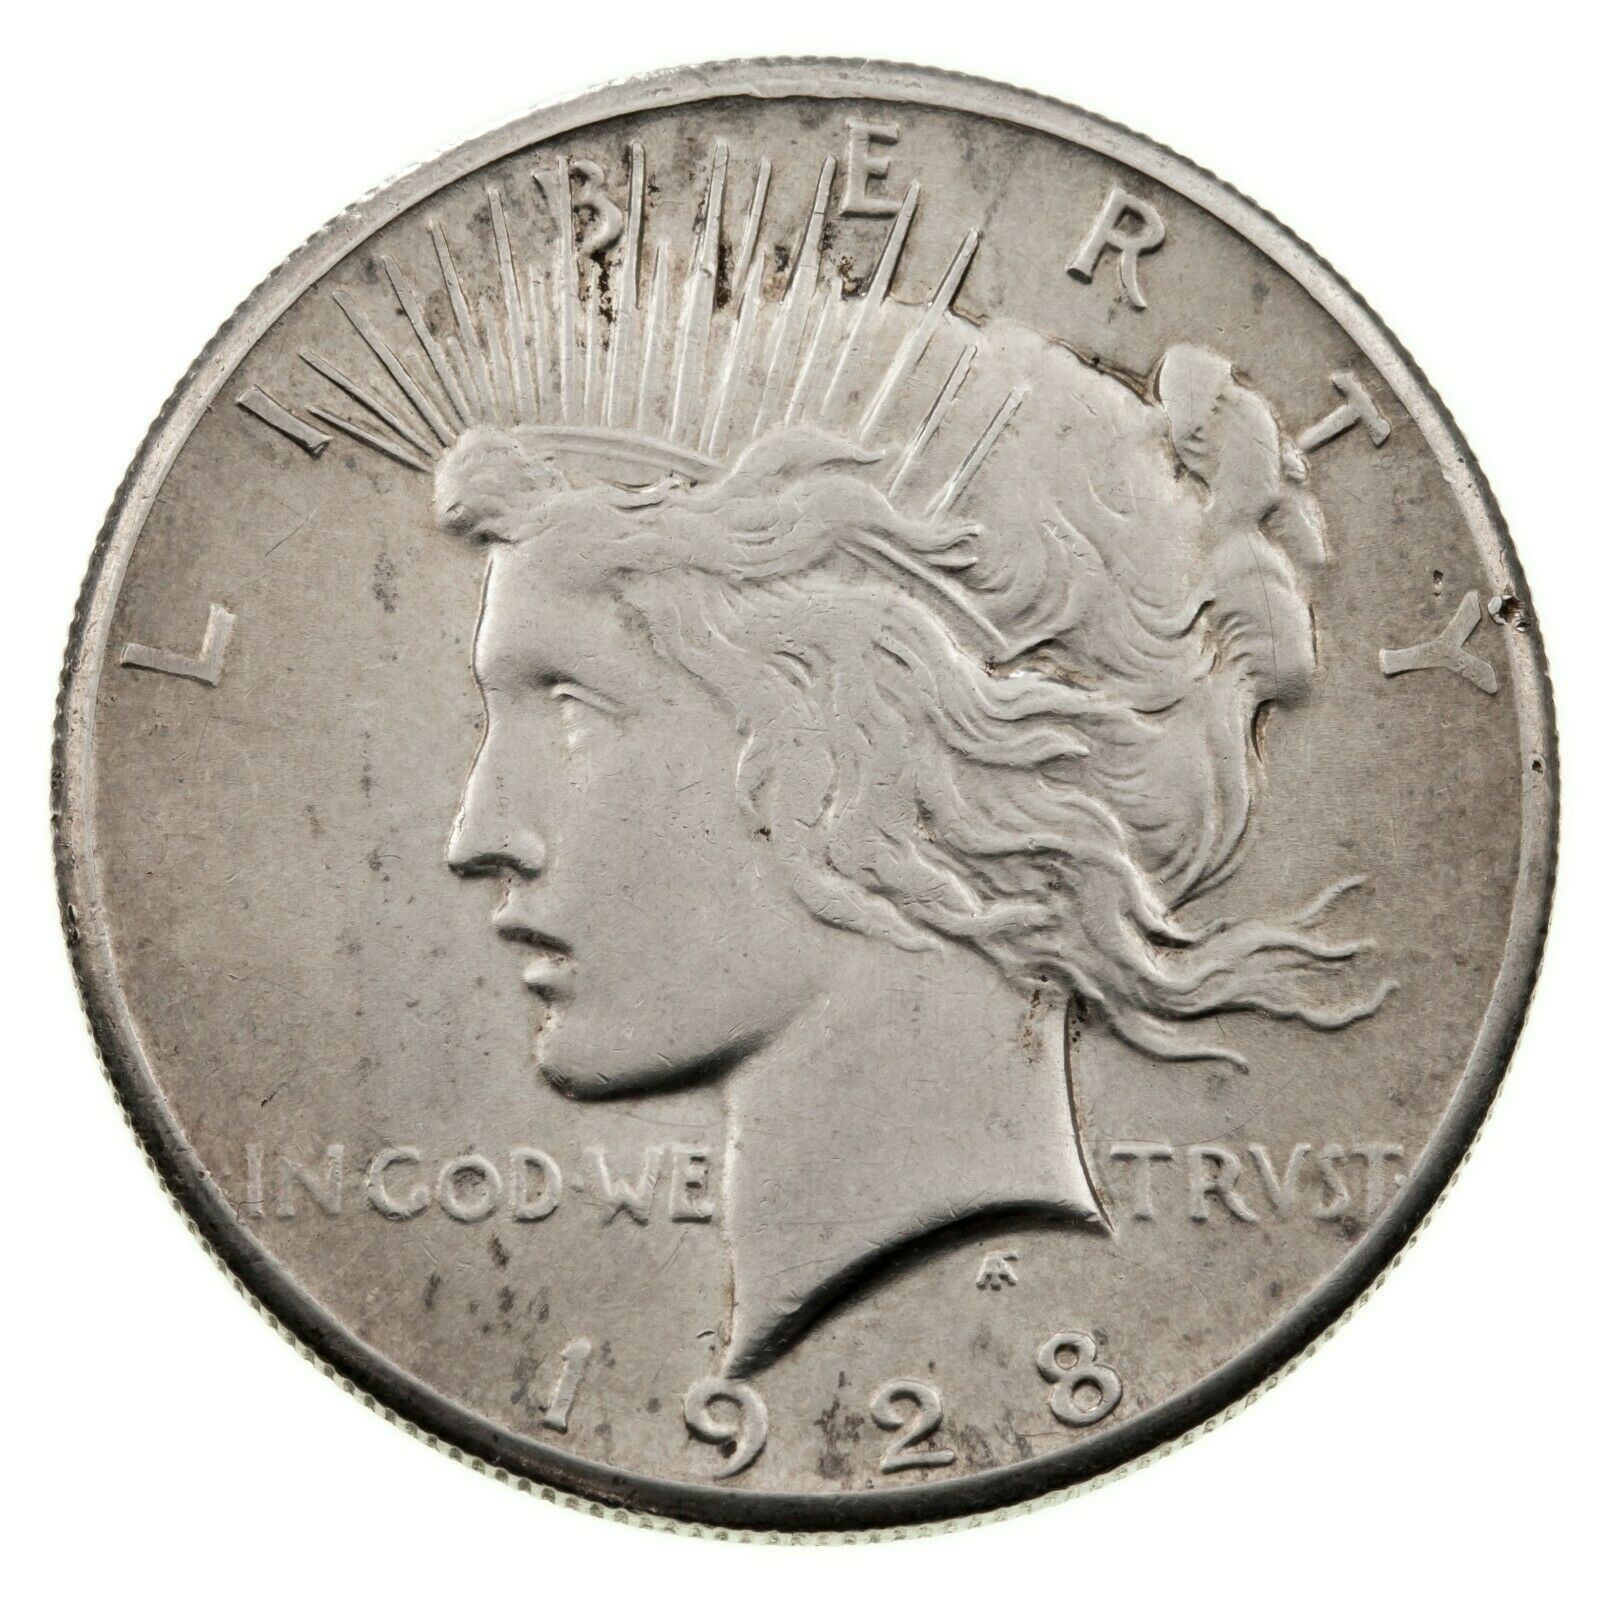 Primary image for 1928 $1 Silver Peace Dollar in AU+ Condition, Coin is UNC with minor hairlines